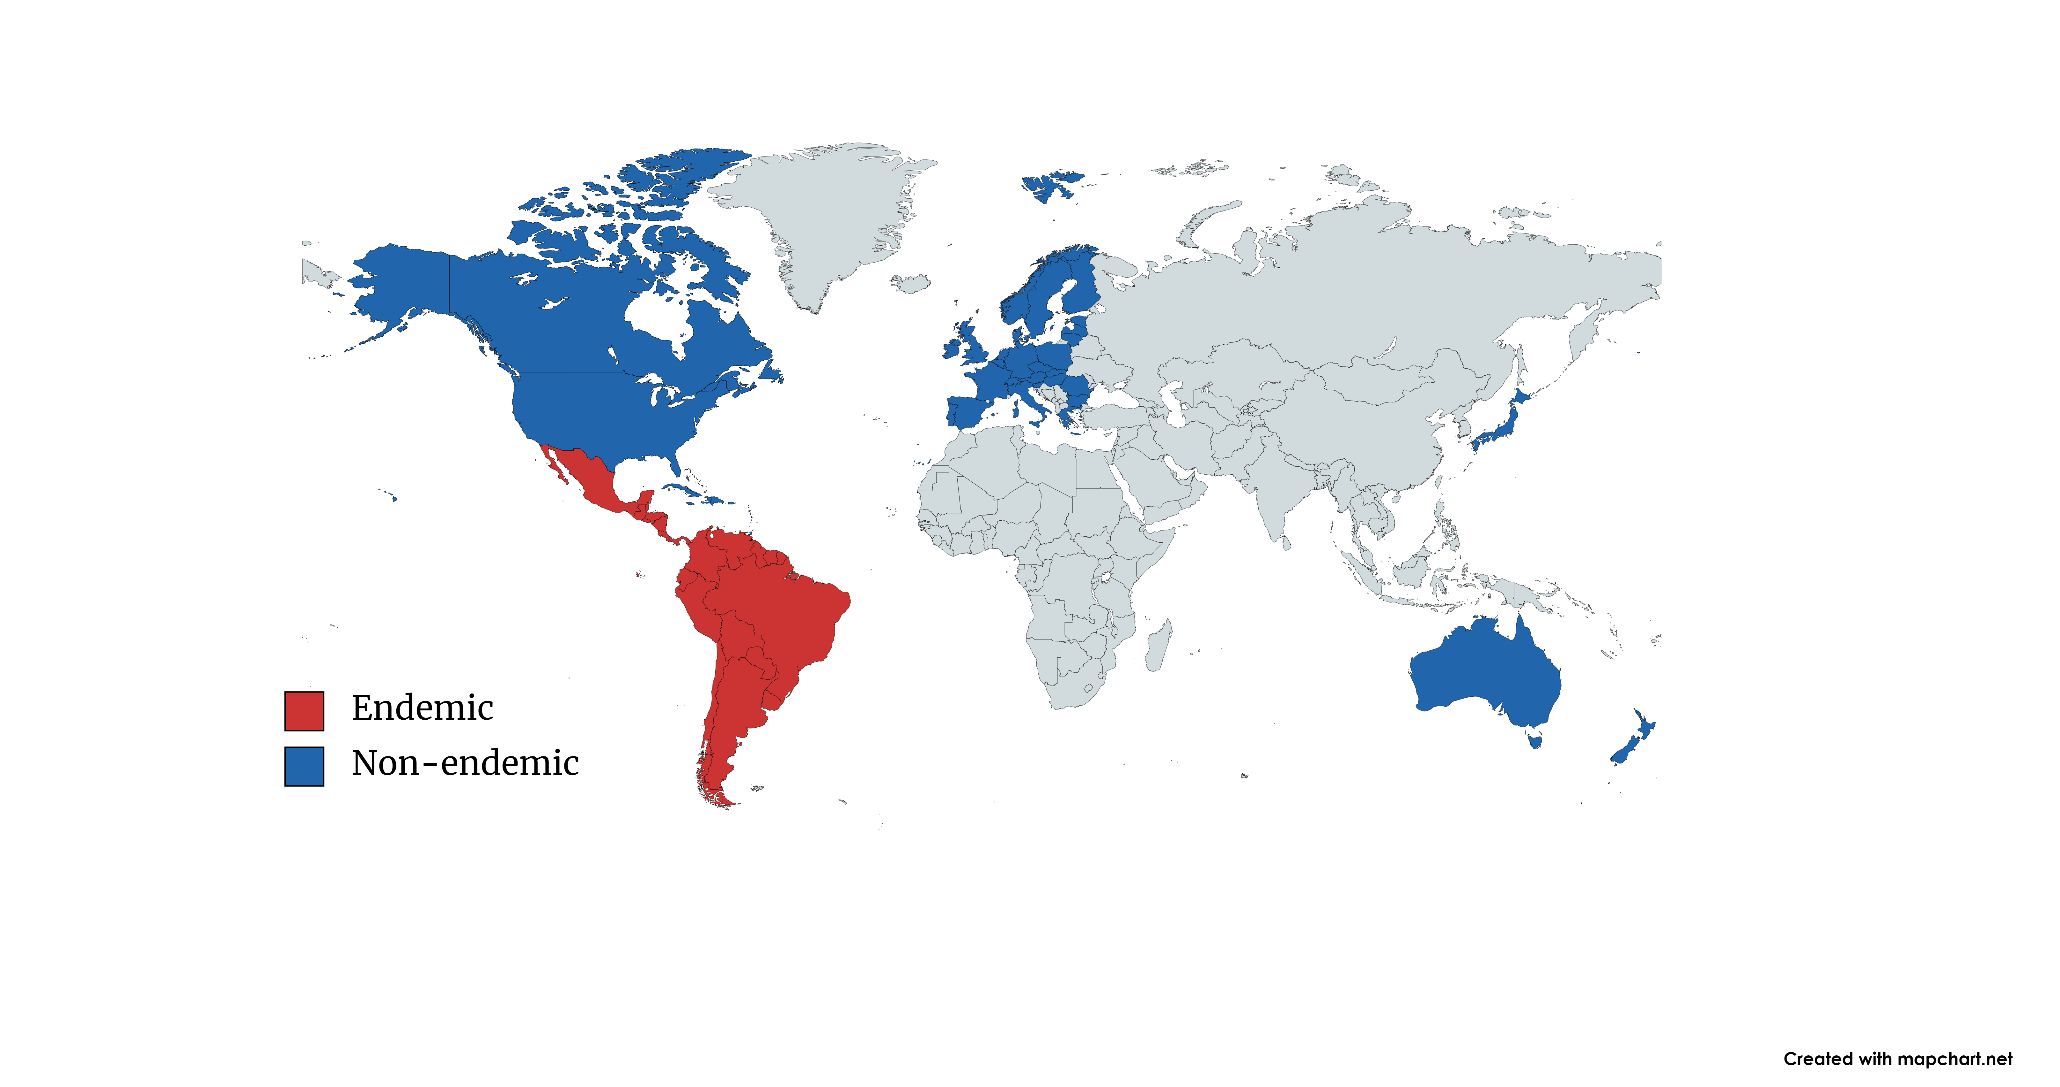 Global distribution map of Chagas disease showing the countries endemic for the disease (shaded red), where transmission occurs mainly through interactions with triatomine bugs in rural areas, as well as the non-endemic countries, where the majority of those with Chagas disease are immigrants from endemic countries (shaded blue). 